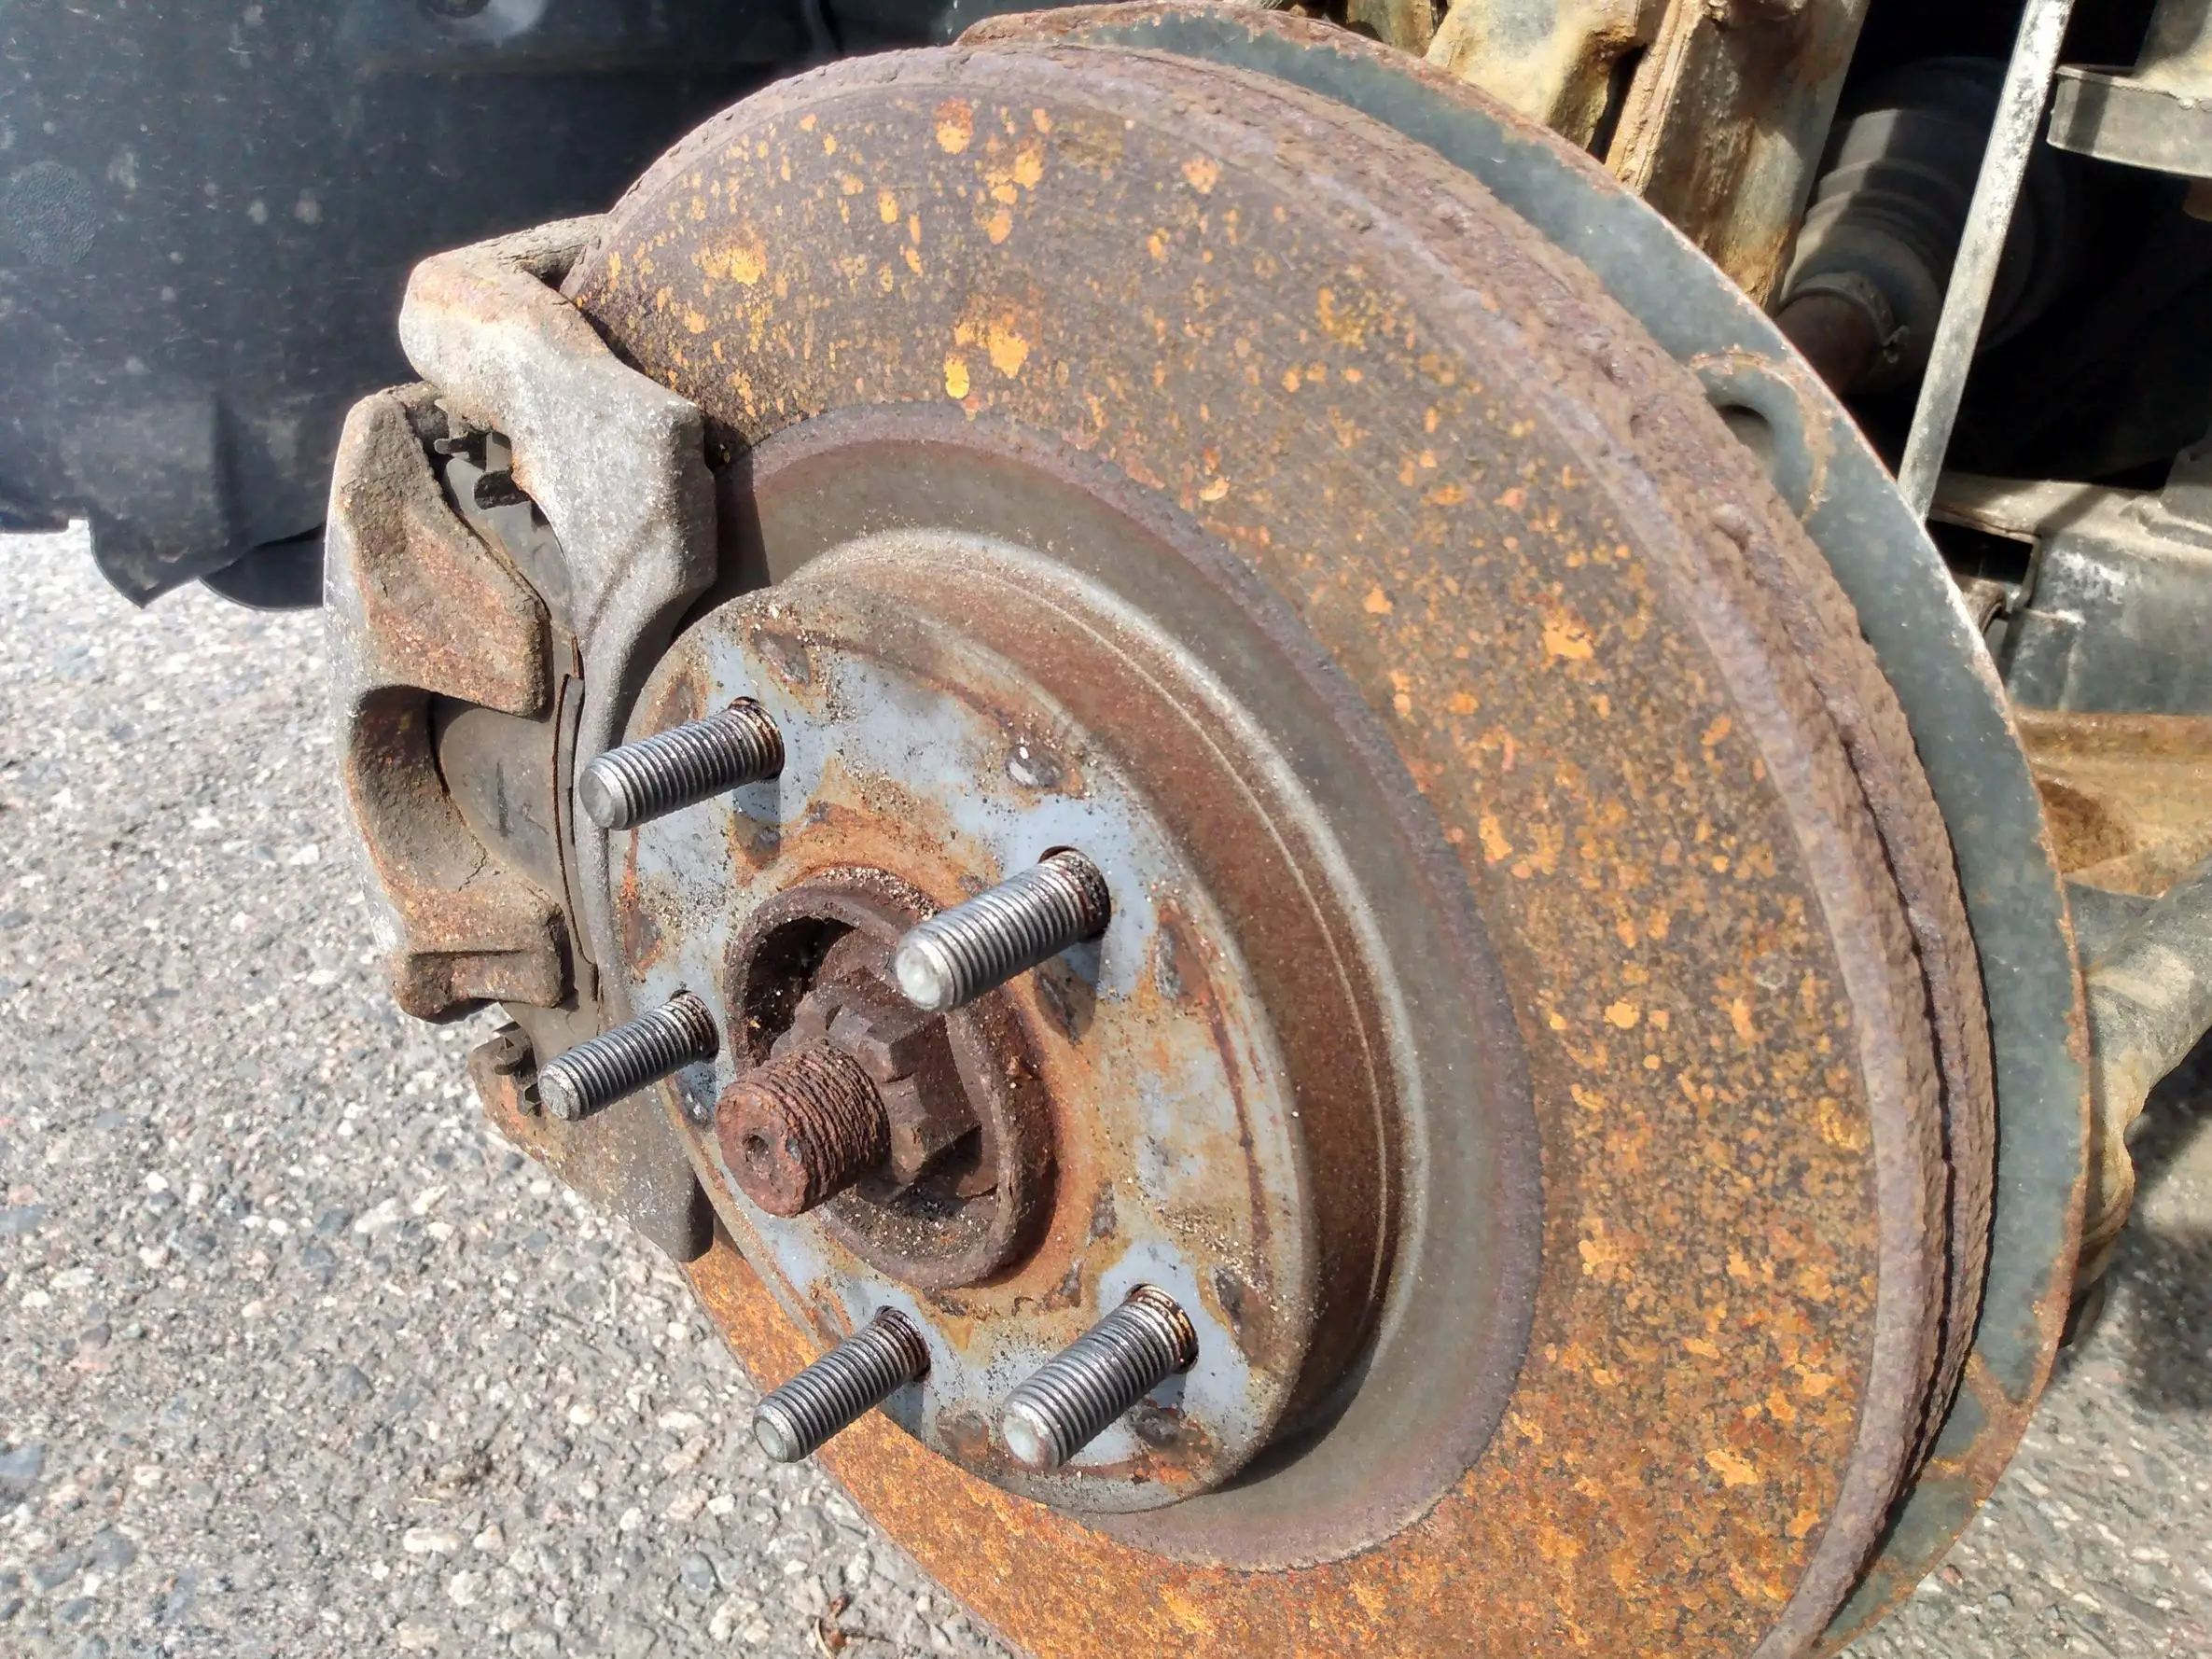 remove rust from brakes